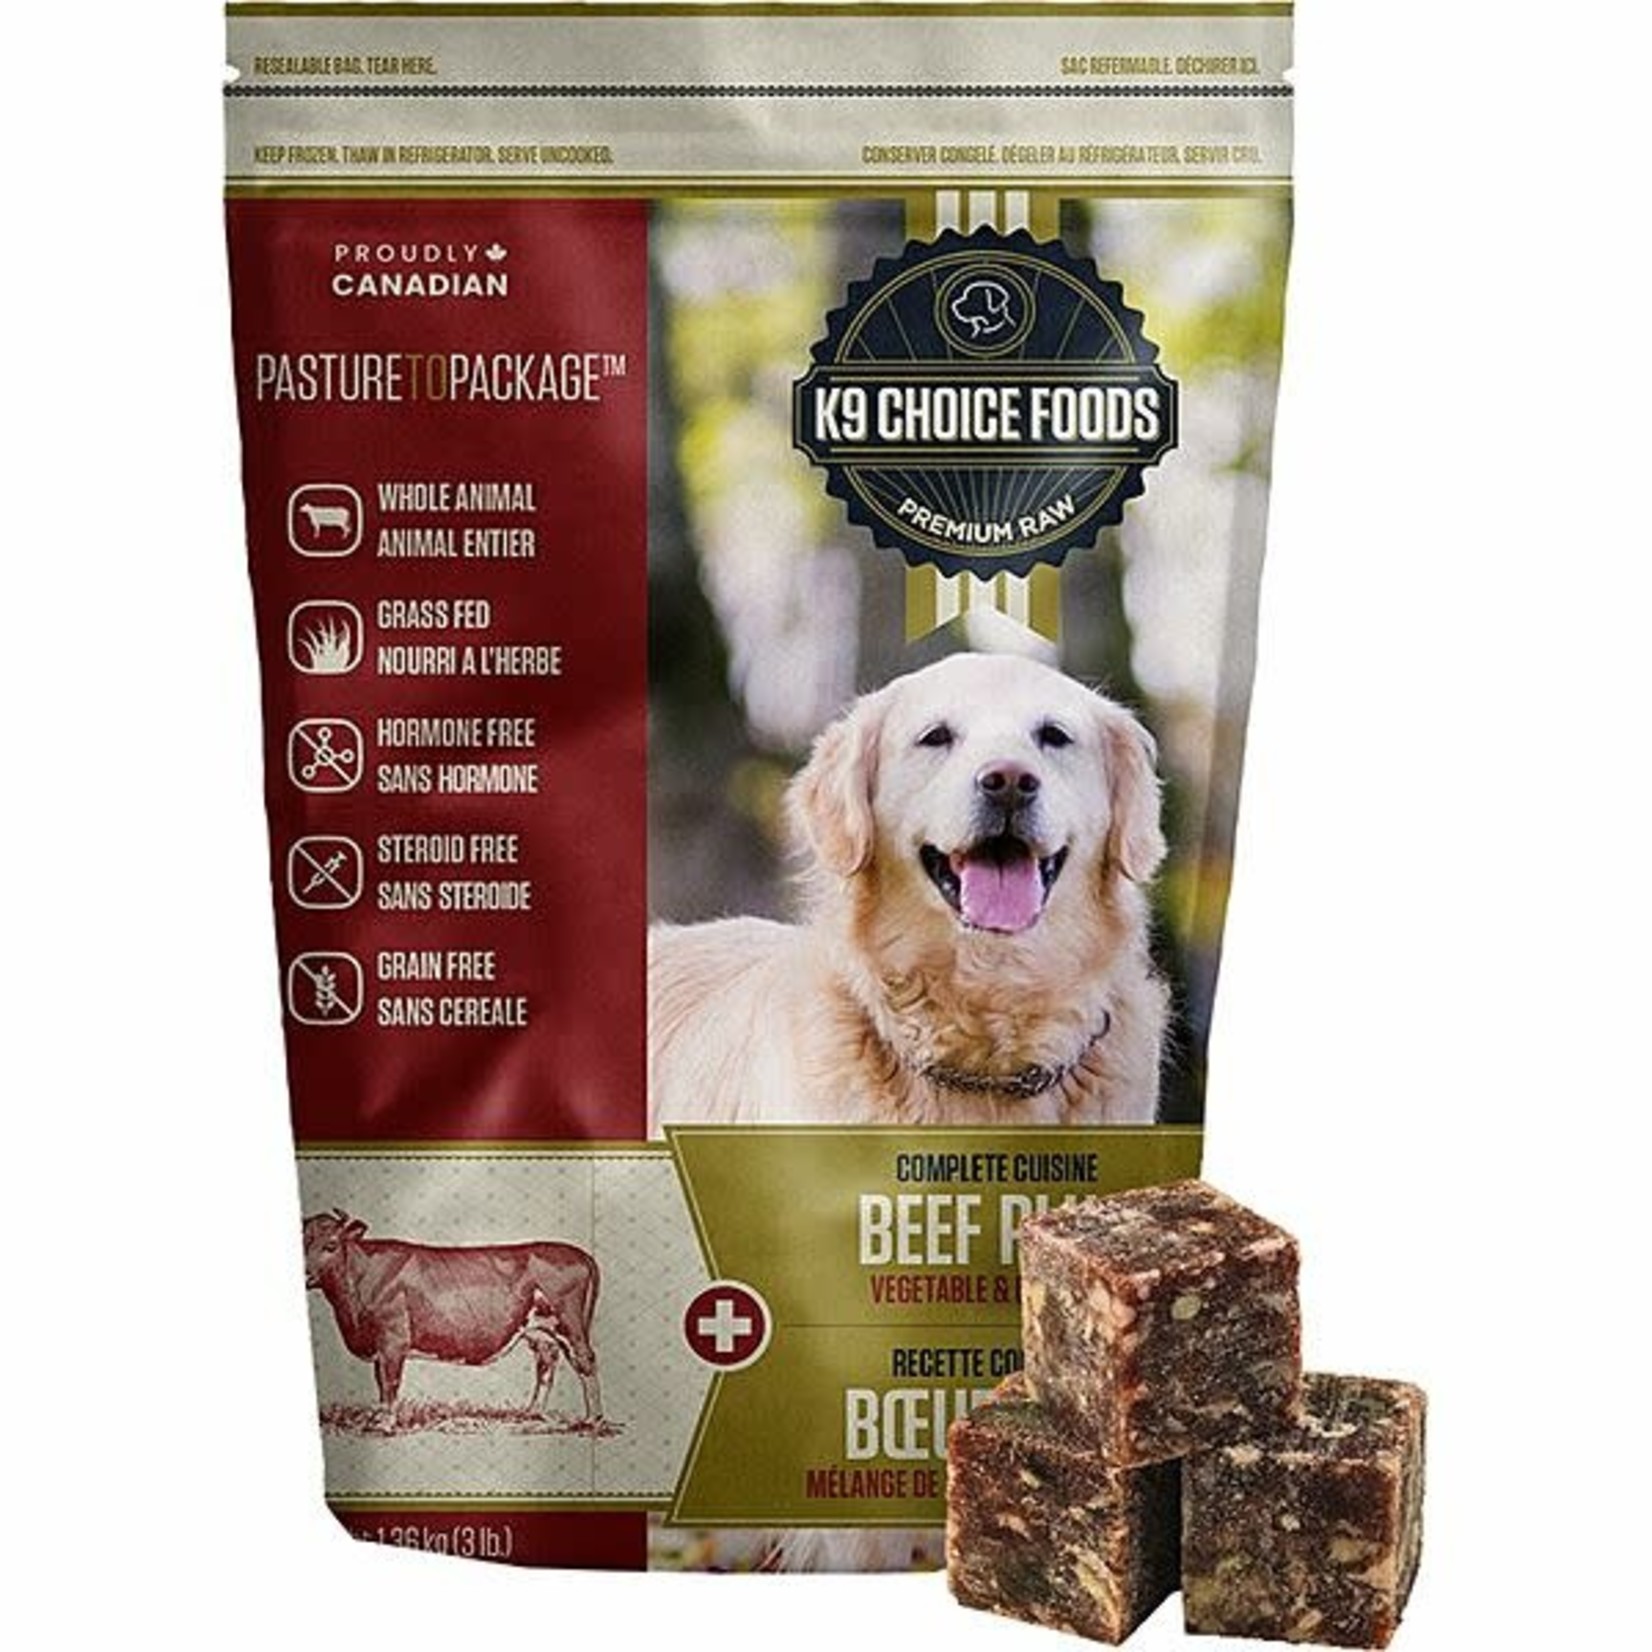 K9 choice frozen Complete raw pieces beef 3lb